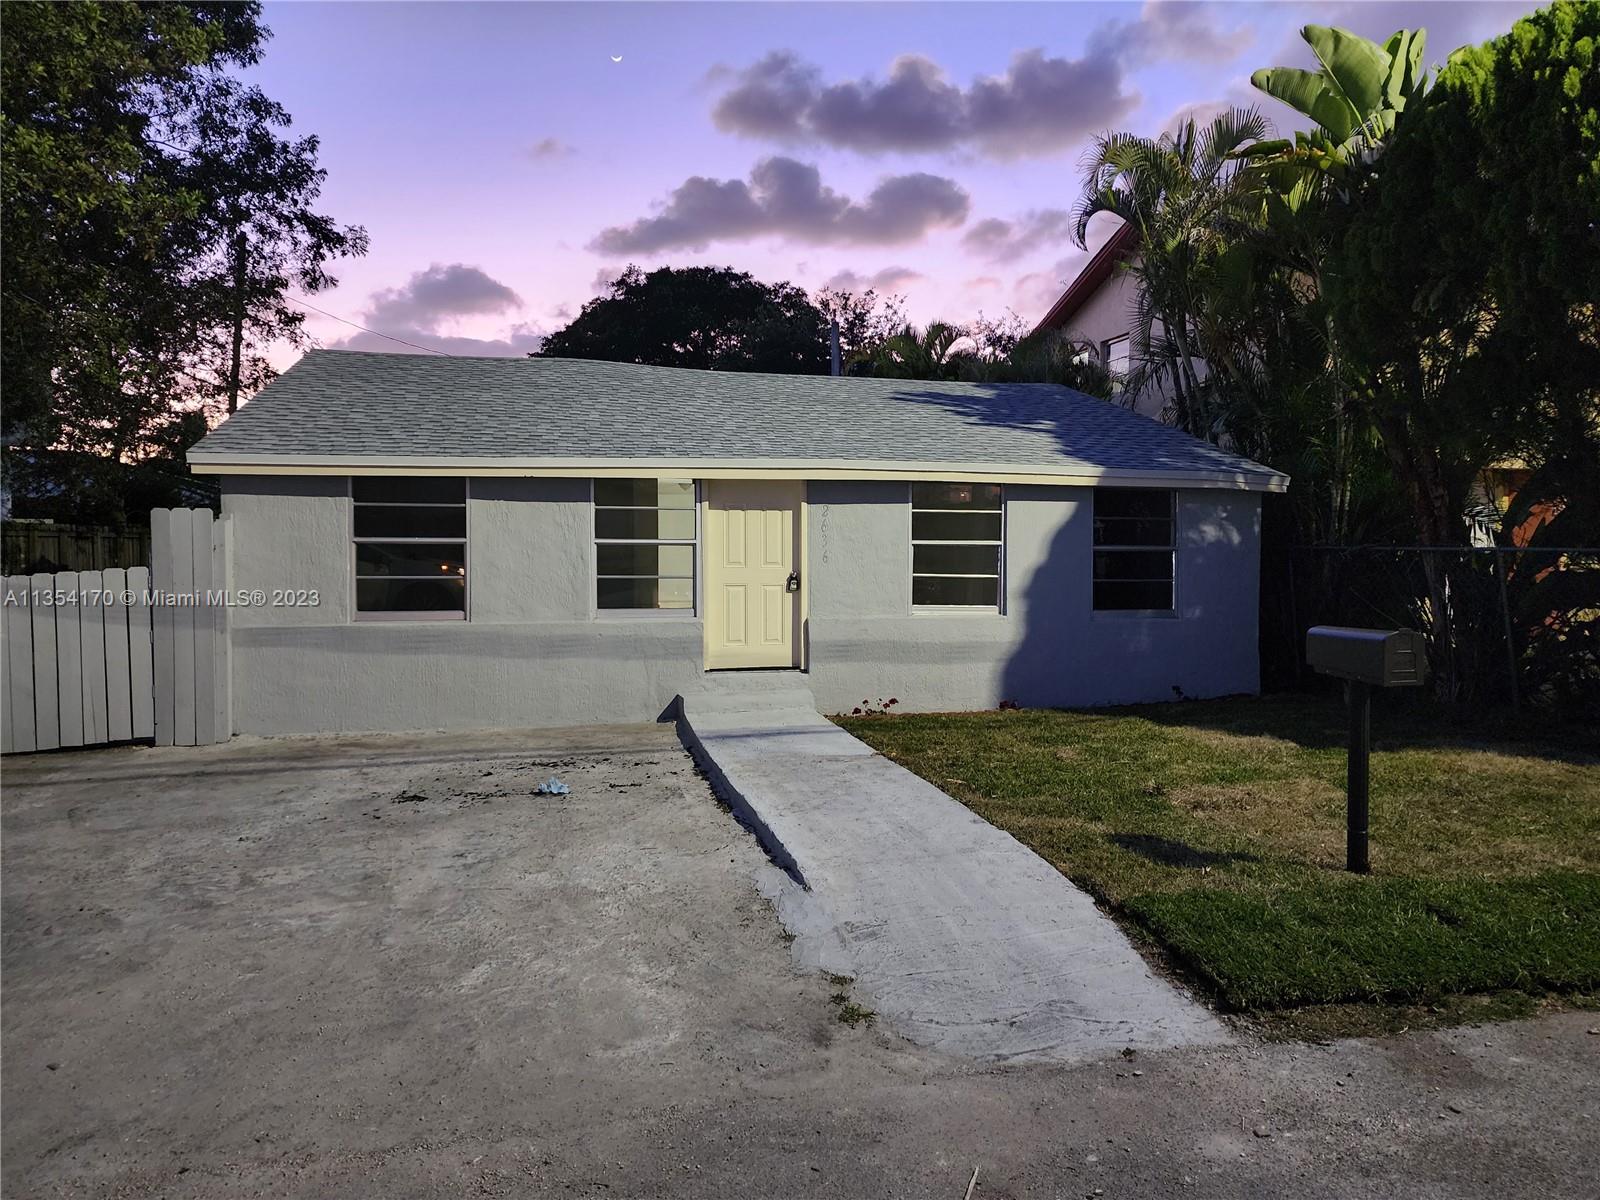 This single-family home features 3 bedrooms and 2 baths, located in a desirable South Bay Estates area. Newly renovated.  New roof. Close to Coral Gables, Coconut Grove, Downtown, Brickell, major city attractions, shopping, restaurants, good schools, major highways and minutes away from Miami International Airport.